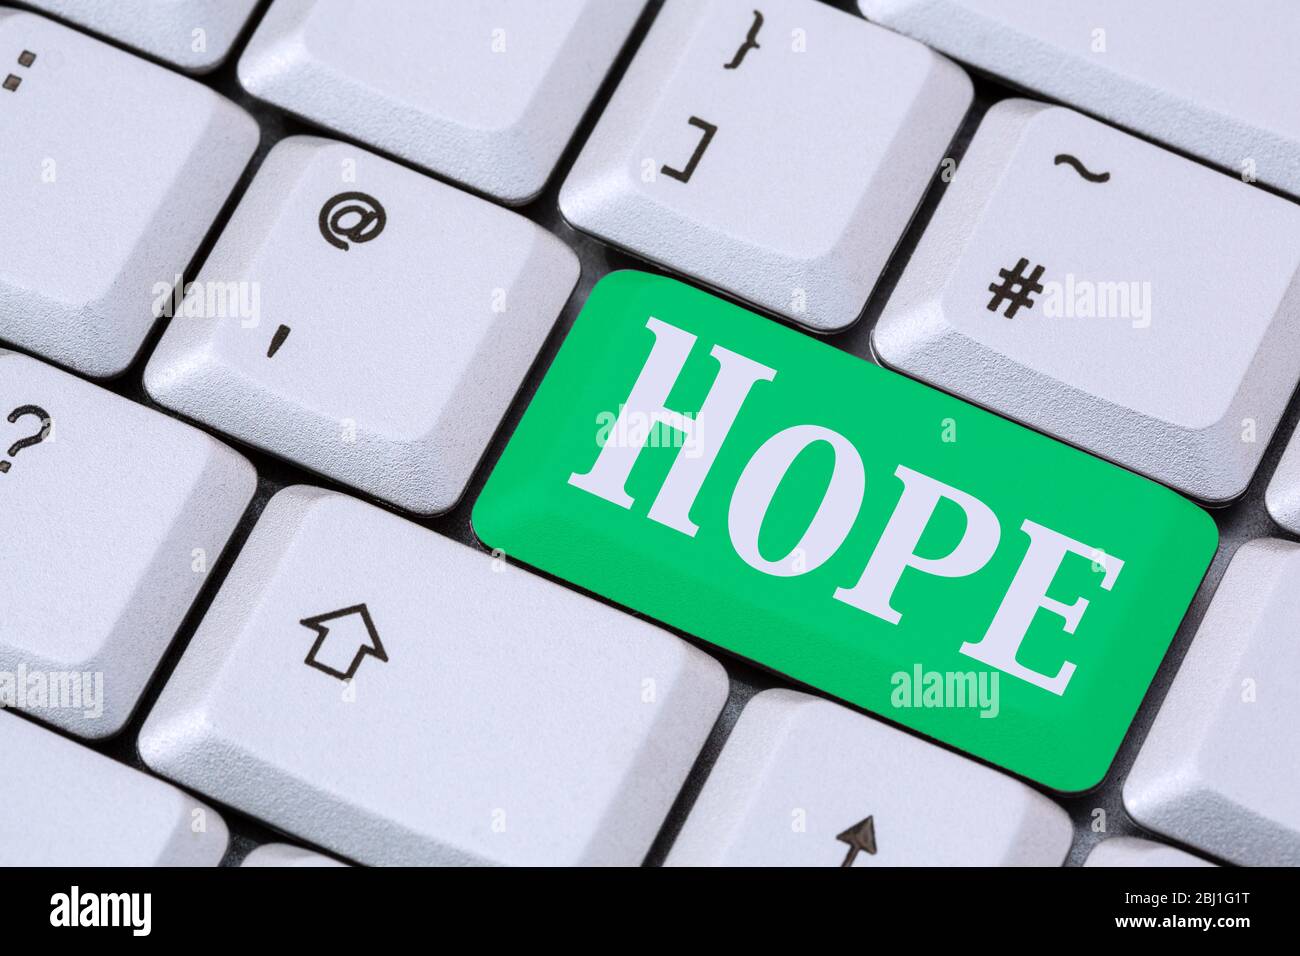 A keyboard with the word HOPE on a green enter key. Hopefulness concept. England, UK, Britain Stock Photo